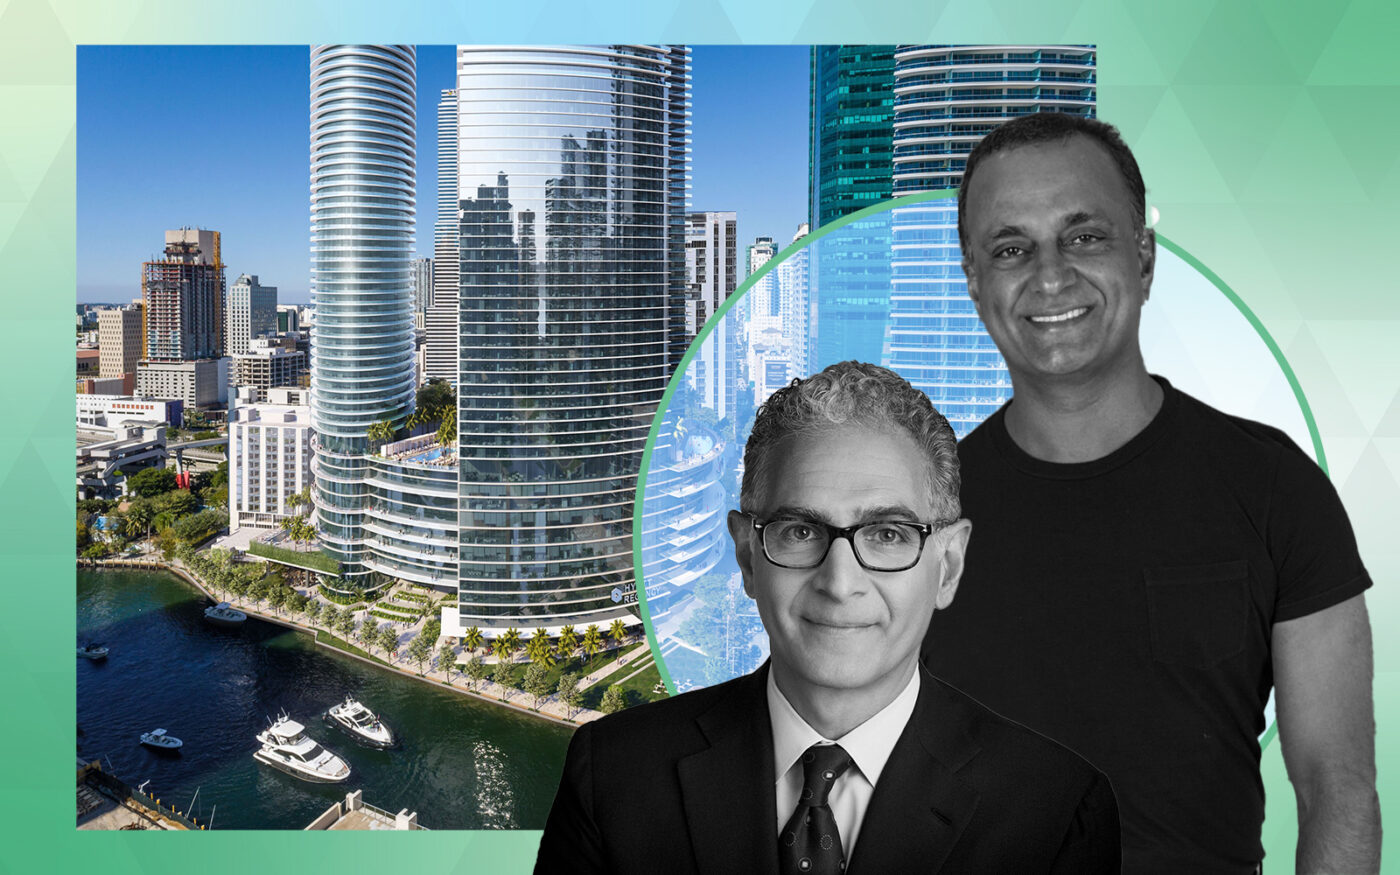 Hyatt CEO Mark Hoplamazian and Gencom Founder and Principal Karim Alibhai with a rendering of the proposed three-tower development at 400 Southeast Second Avenue